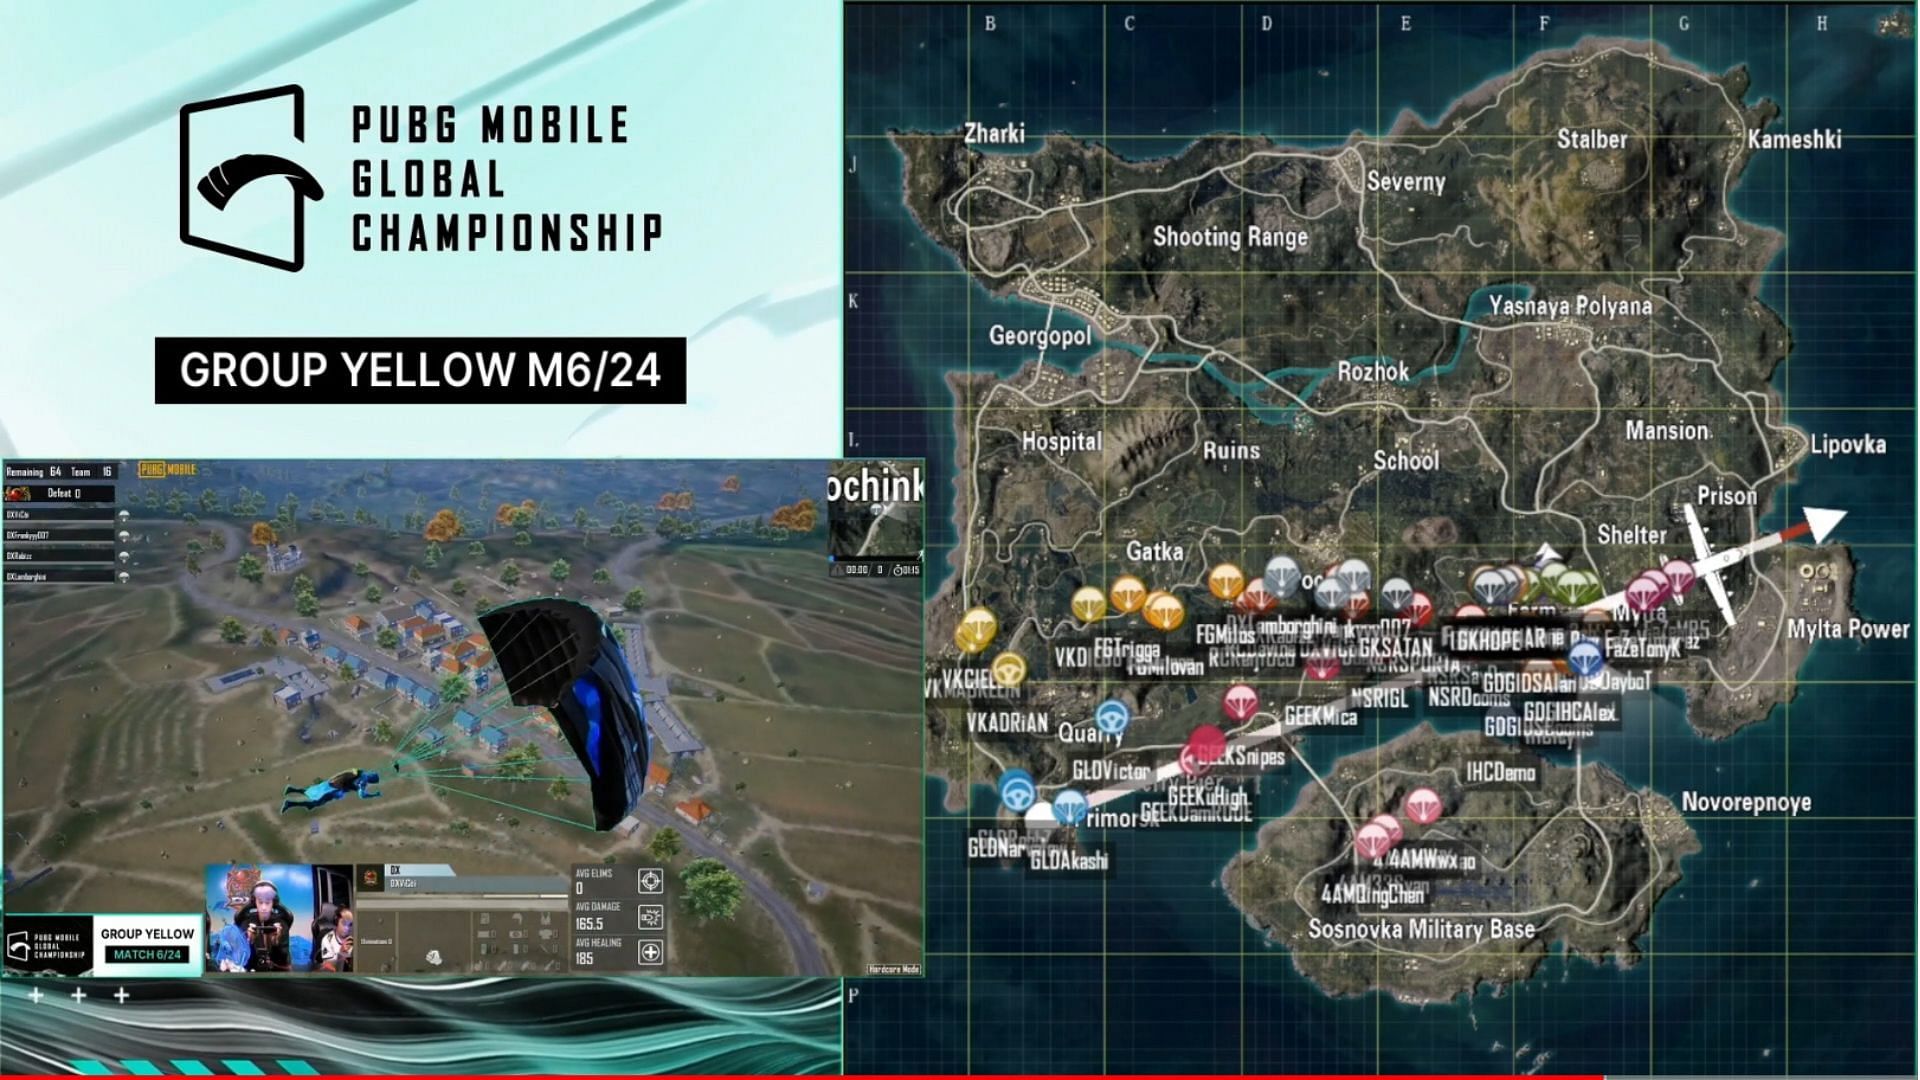 PMGC Group Yellow Day 1 came to a close (Image via PUBG Mobile)